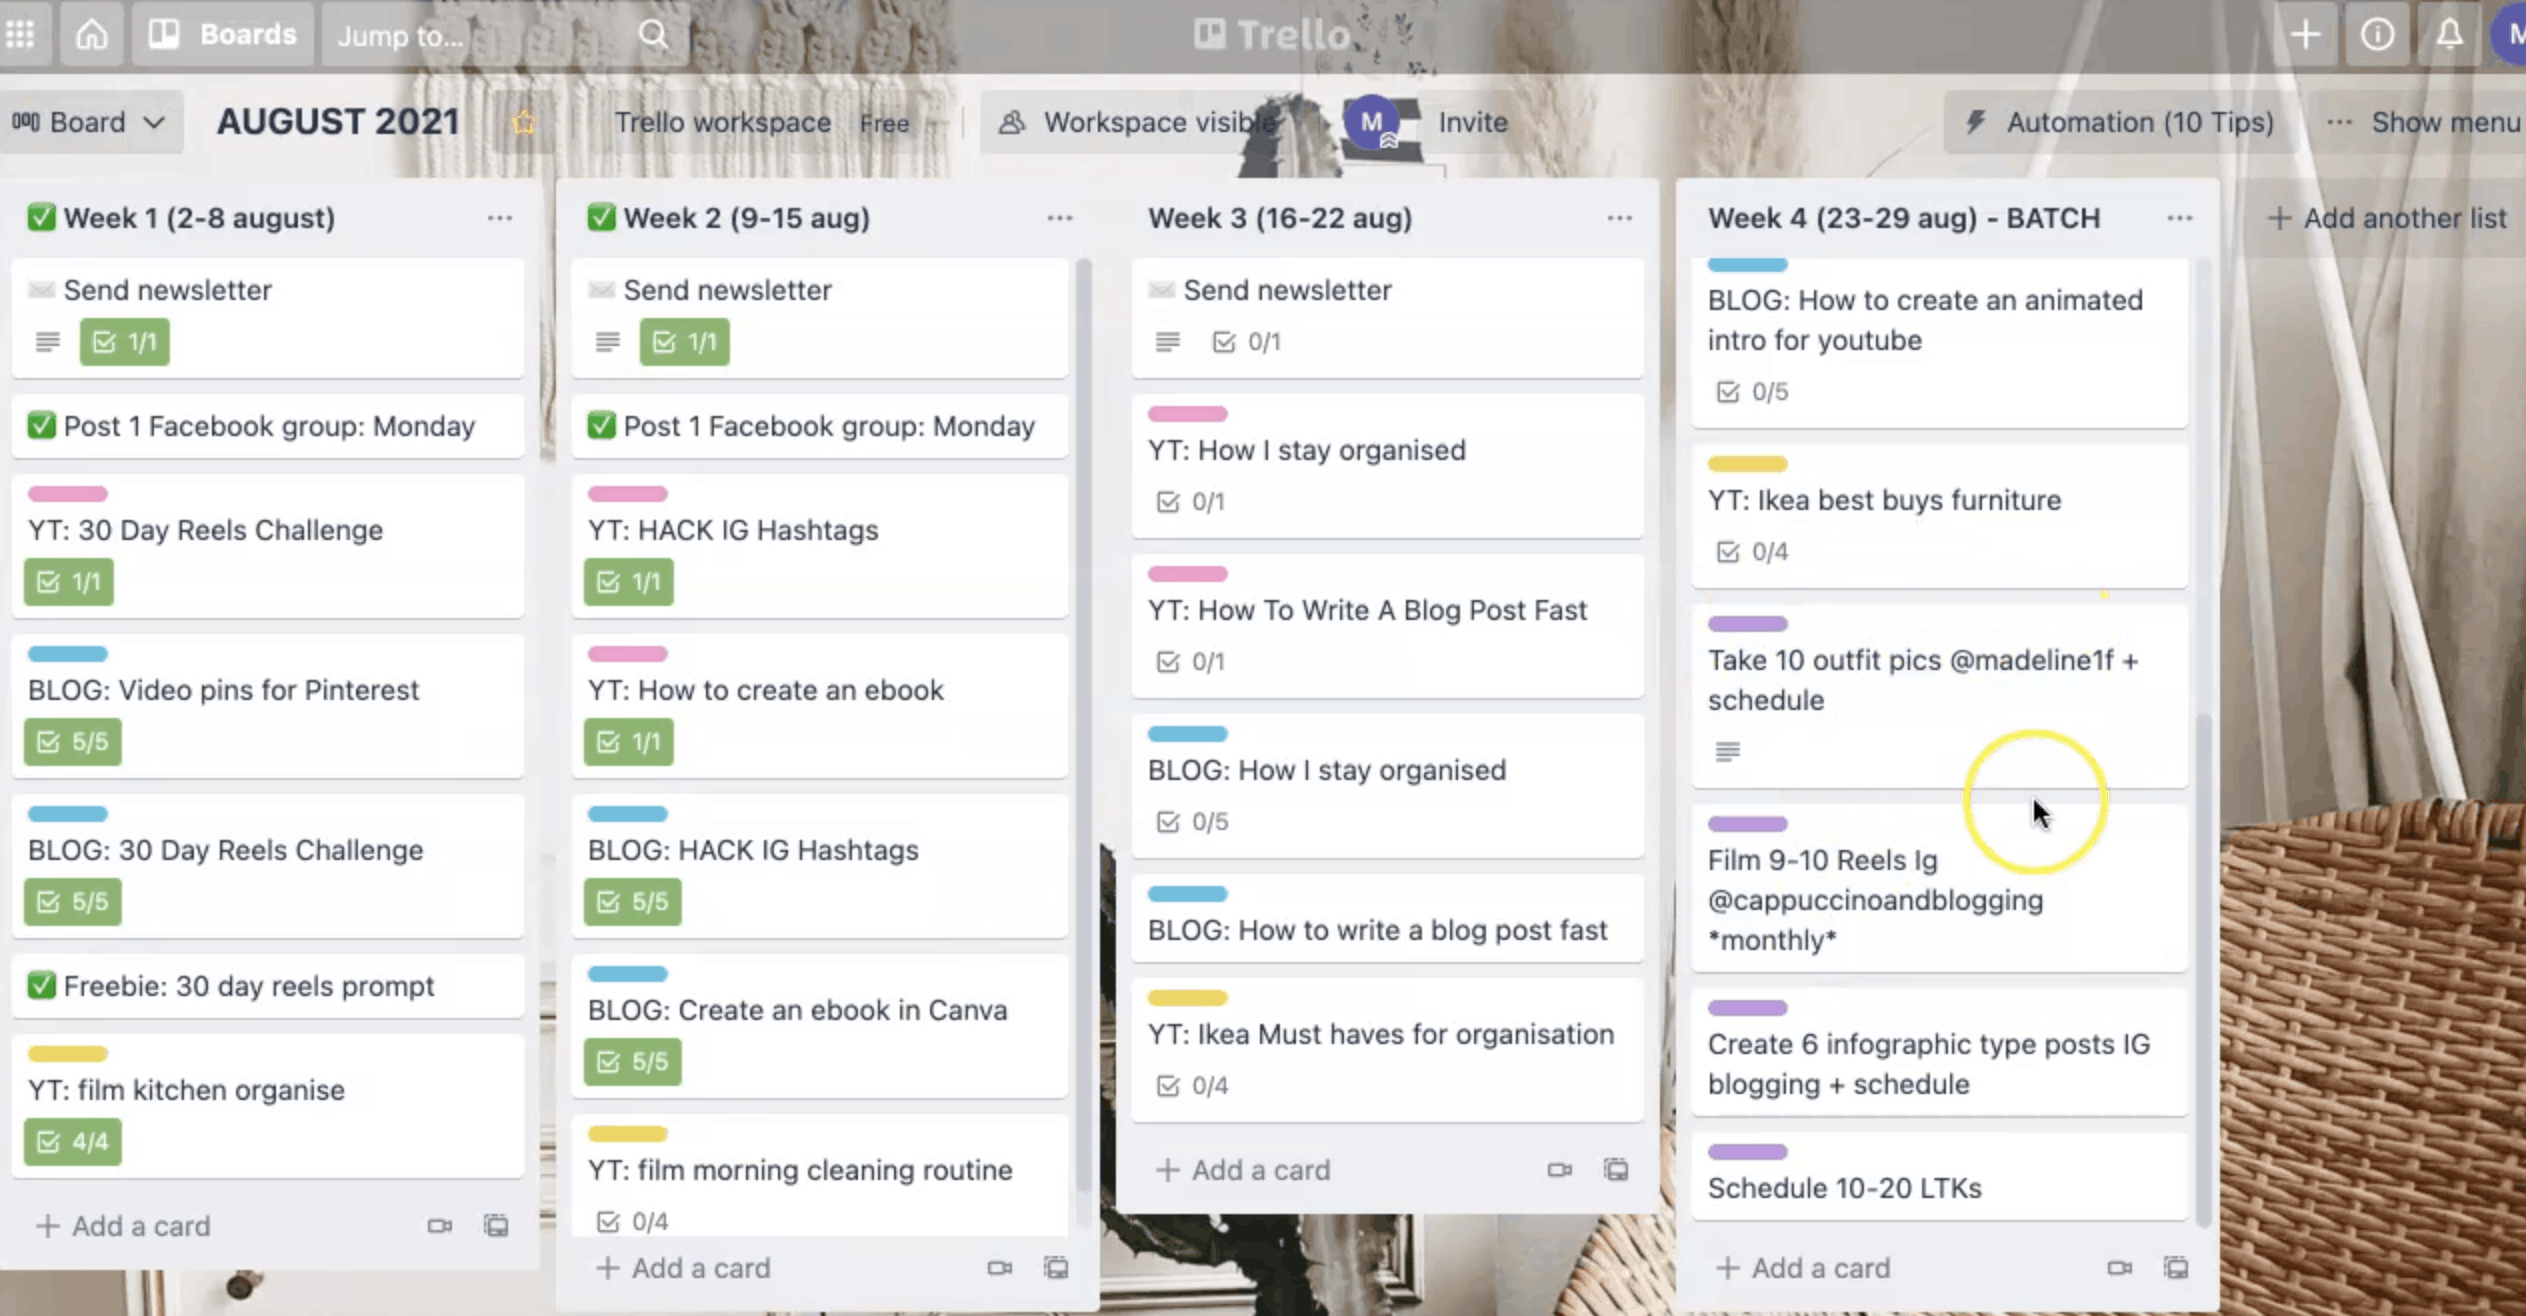 How to use trello for editorial content planning